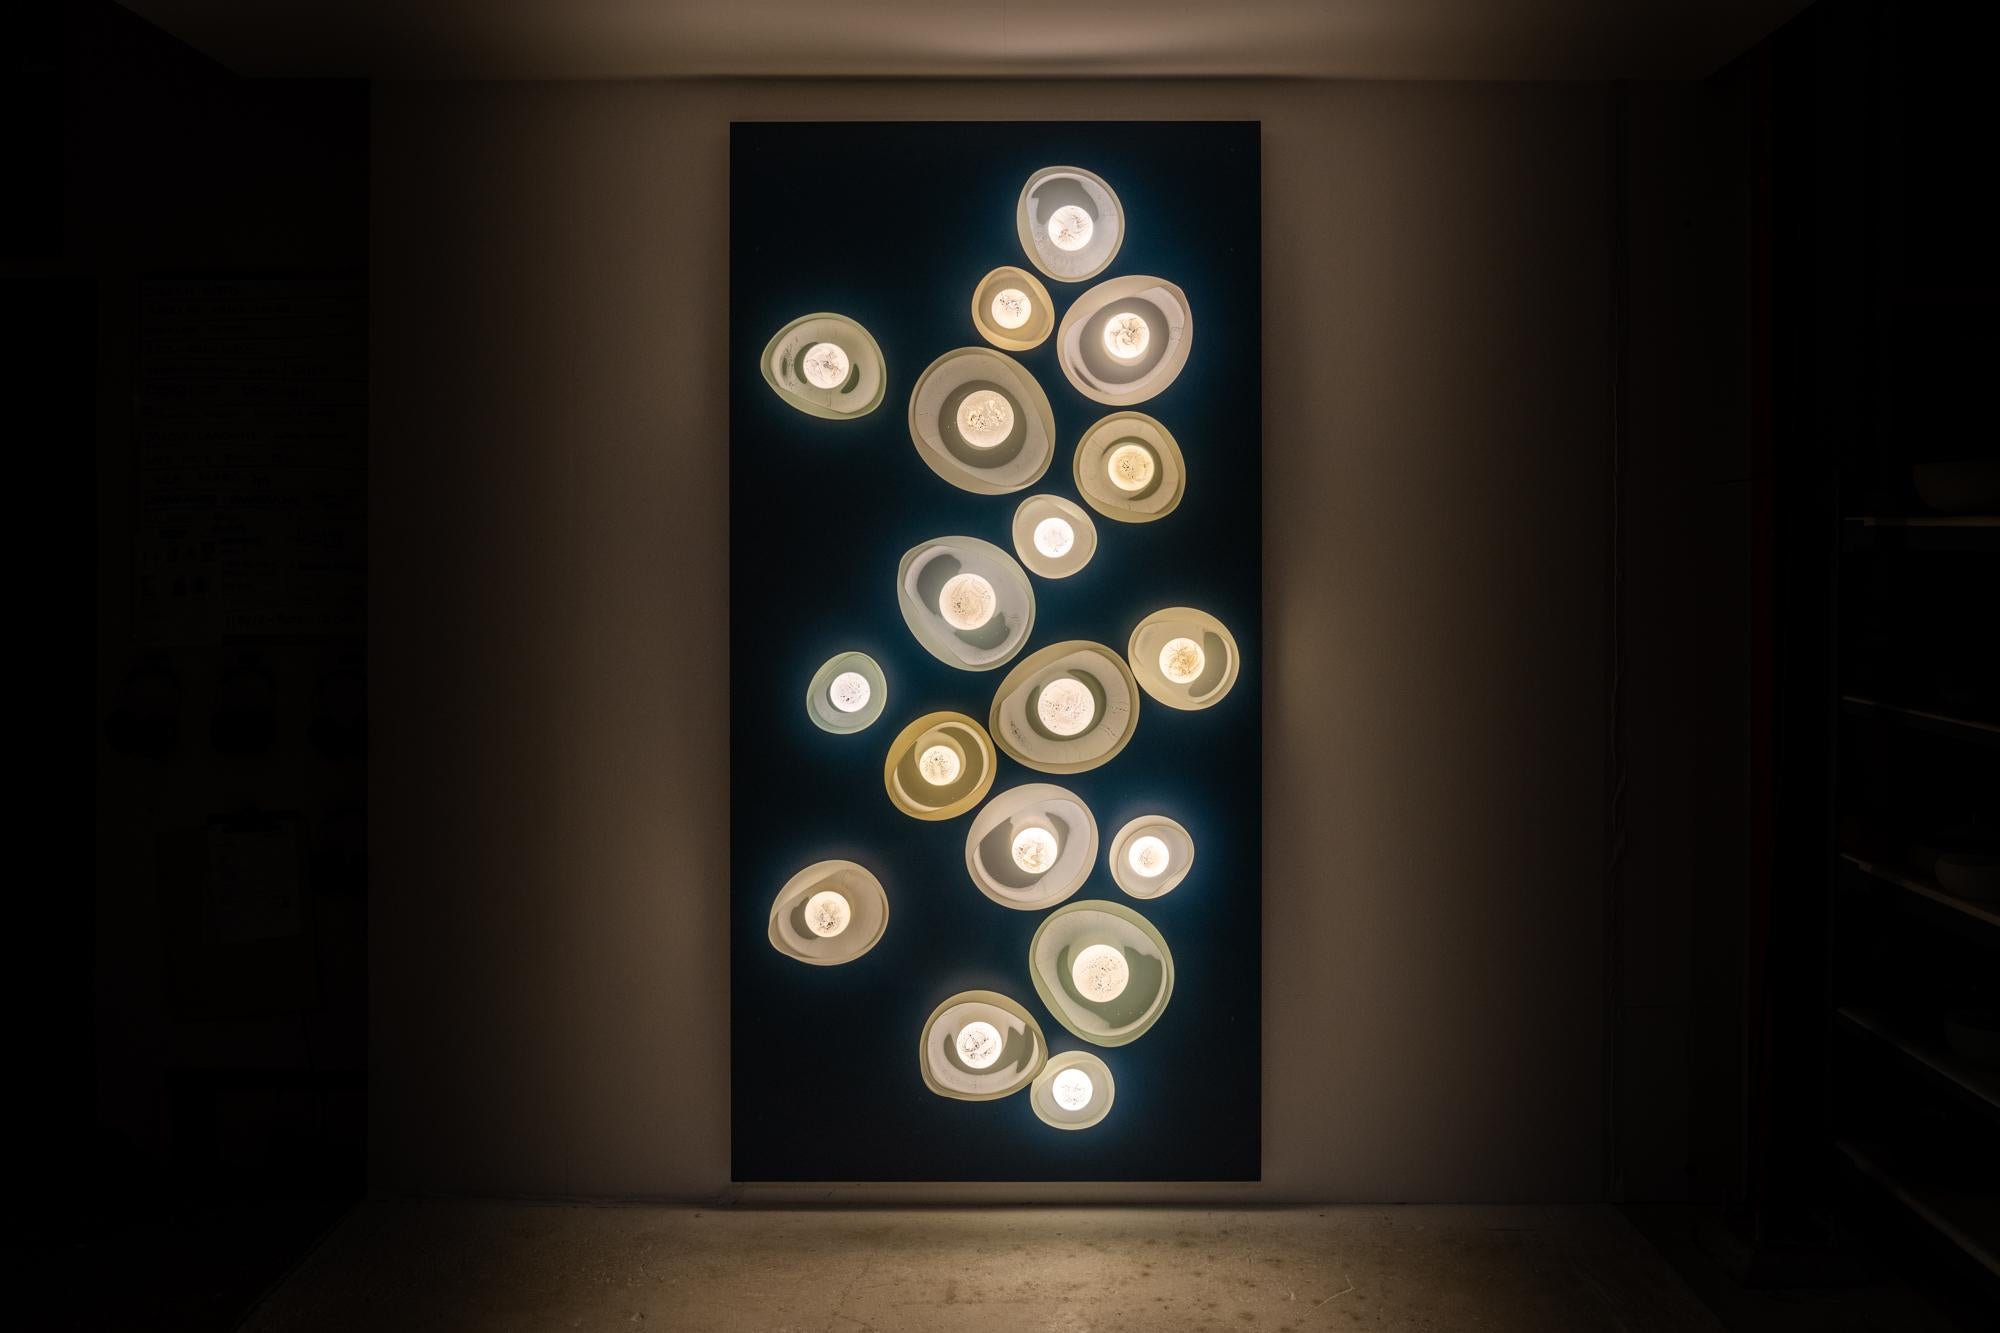 Geo Petra Wall Light Installation by The GoodMan Studio
Dimensions (May vary):
Small ⌀ 15 x H 6 cm / ⌀ 21 x H 6 cm
Medium ⌀ 23 x H 6 cm / ⌀ 28 x H 6 cm
Large ⌀ 31 x H 6 cm / ⌀ 36 x H 6 cm
Materials: Glass, Metal and Silver Leaf

Hand blown glass